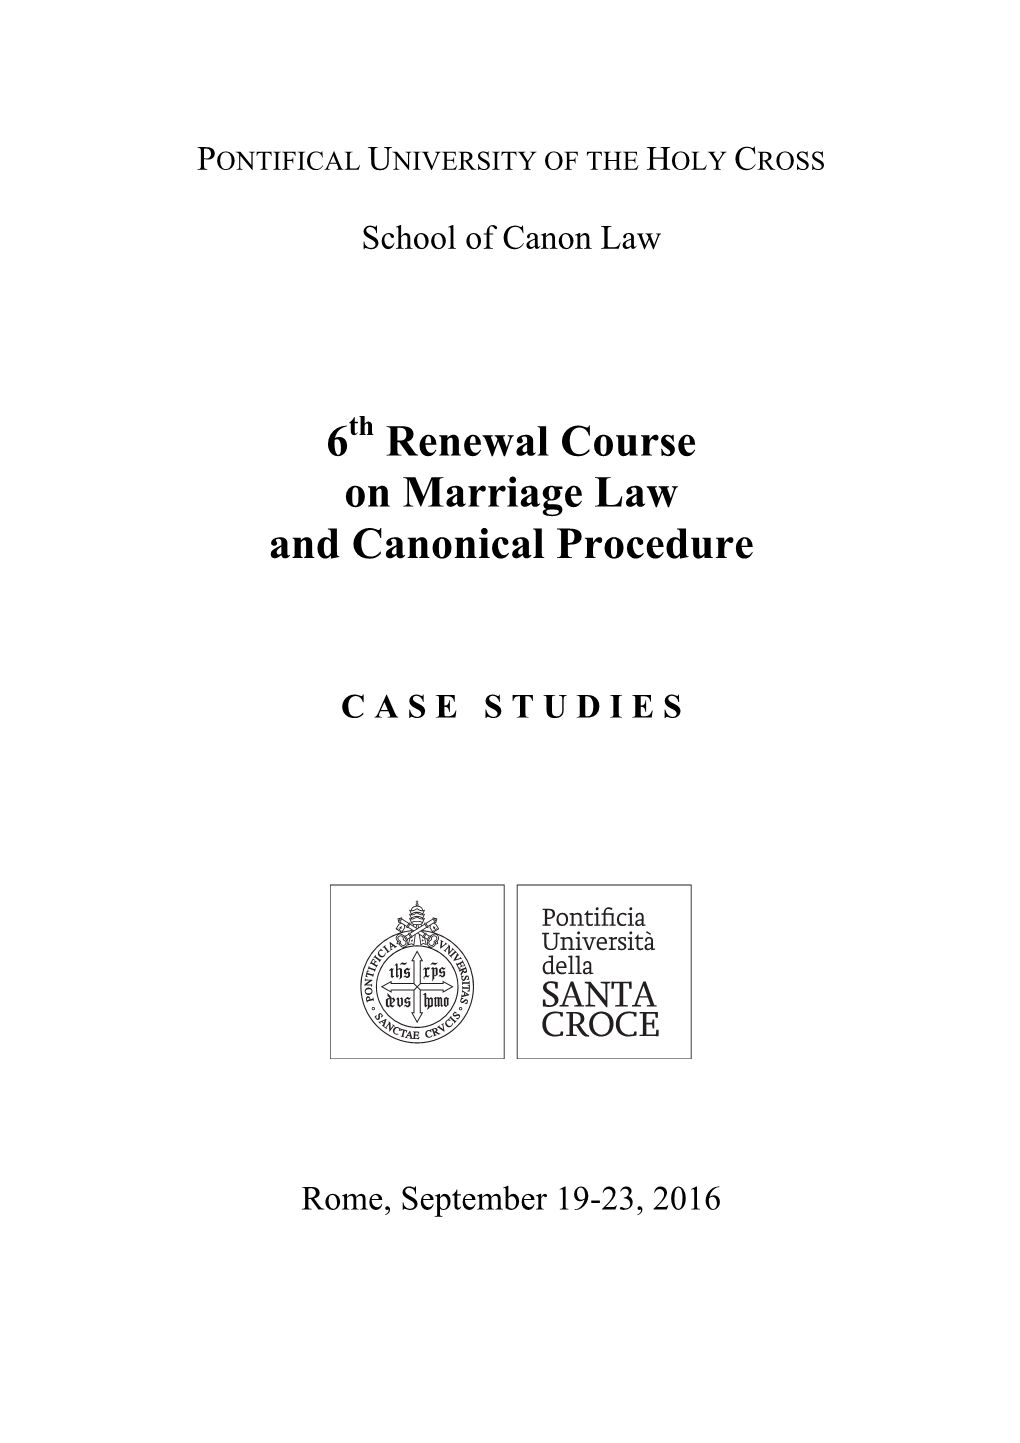 6 Renewal Course on Marriage Law and Canonical Procedure